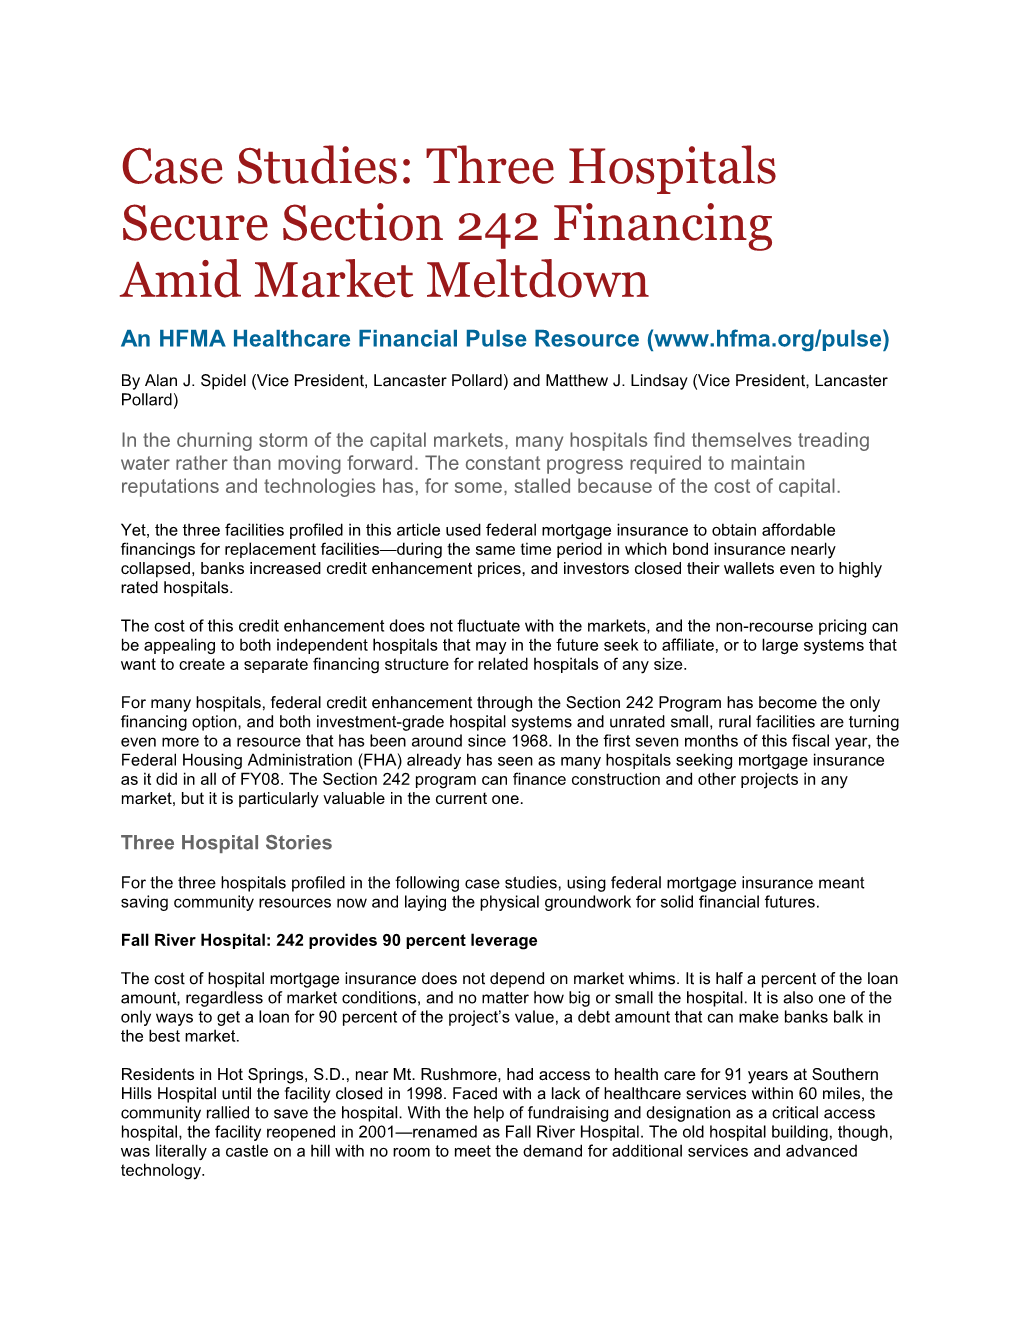 Case Studies: Three Hospitals Secure Section 242 Financing Amid Market Meltdown